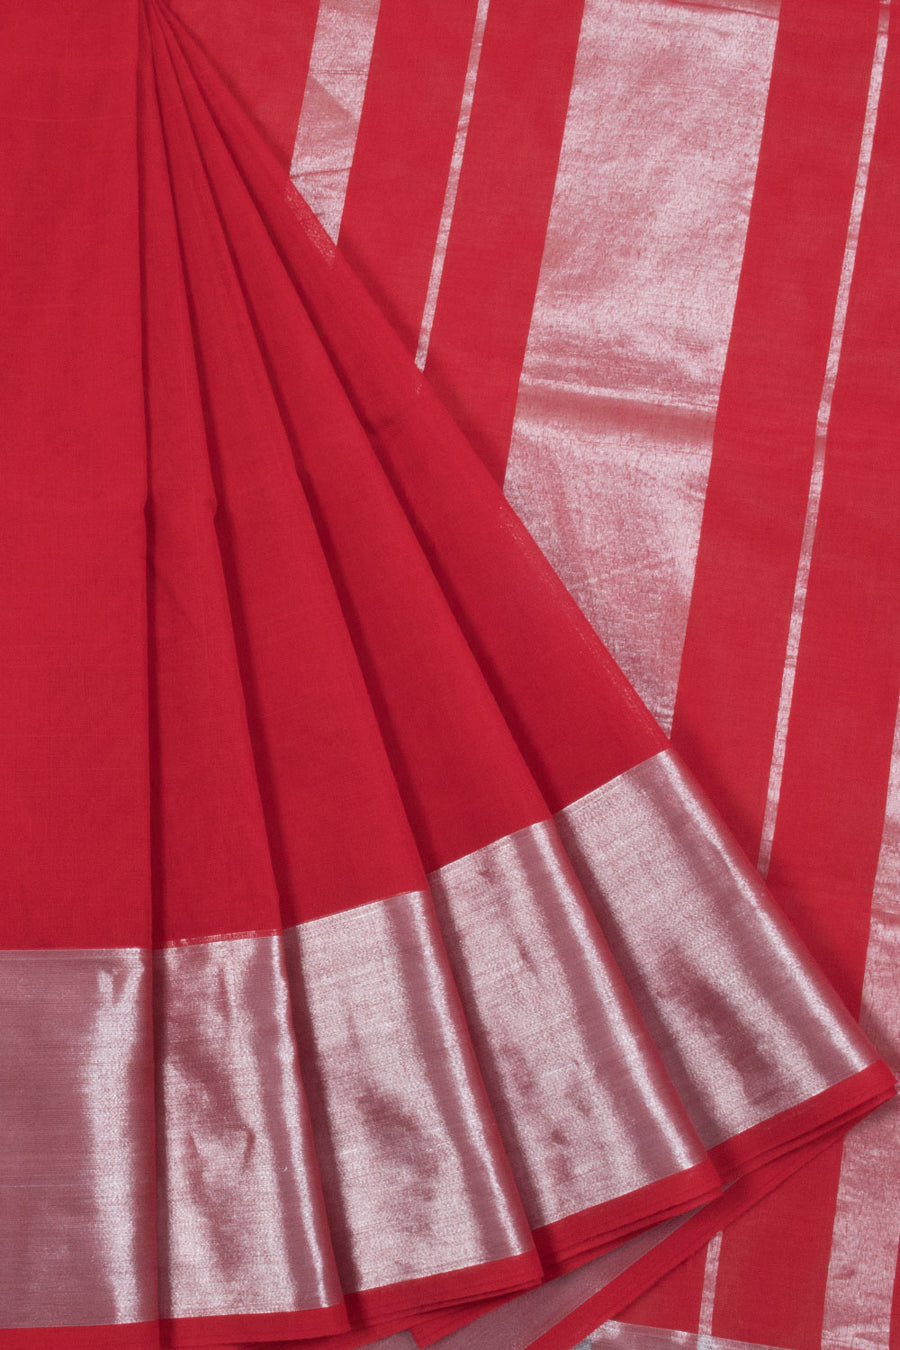 Tomato Red Handwoven Solapur Cotton Saree with Tissue Border, Pallu and without Blouse